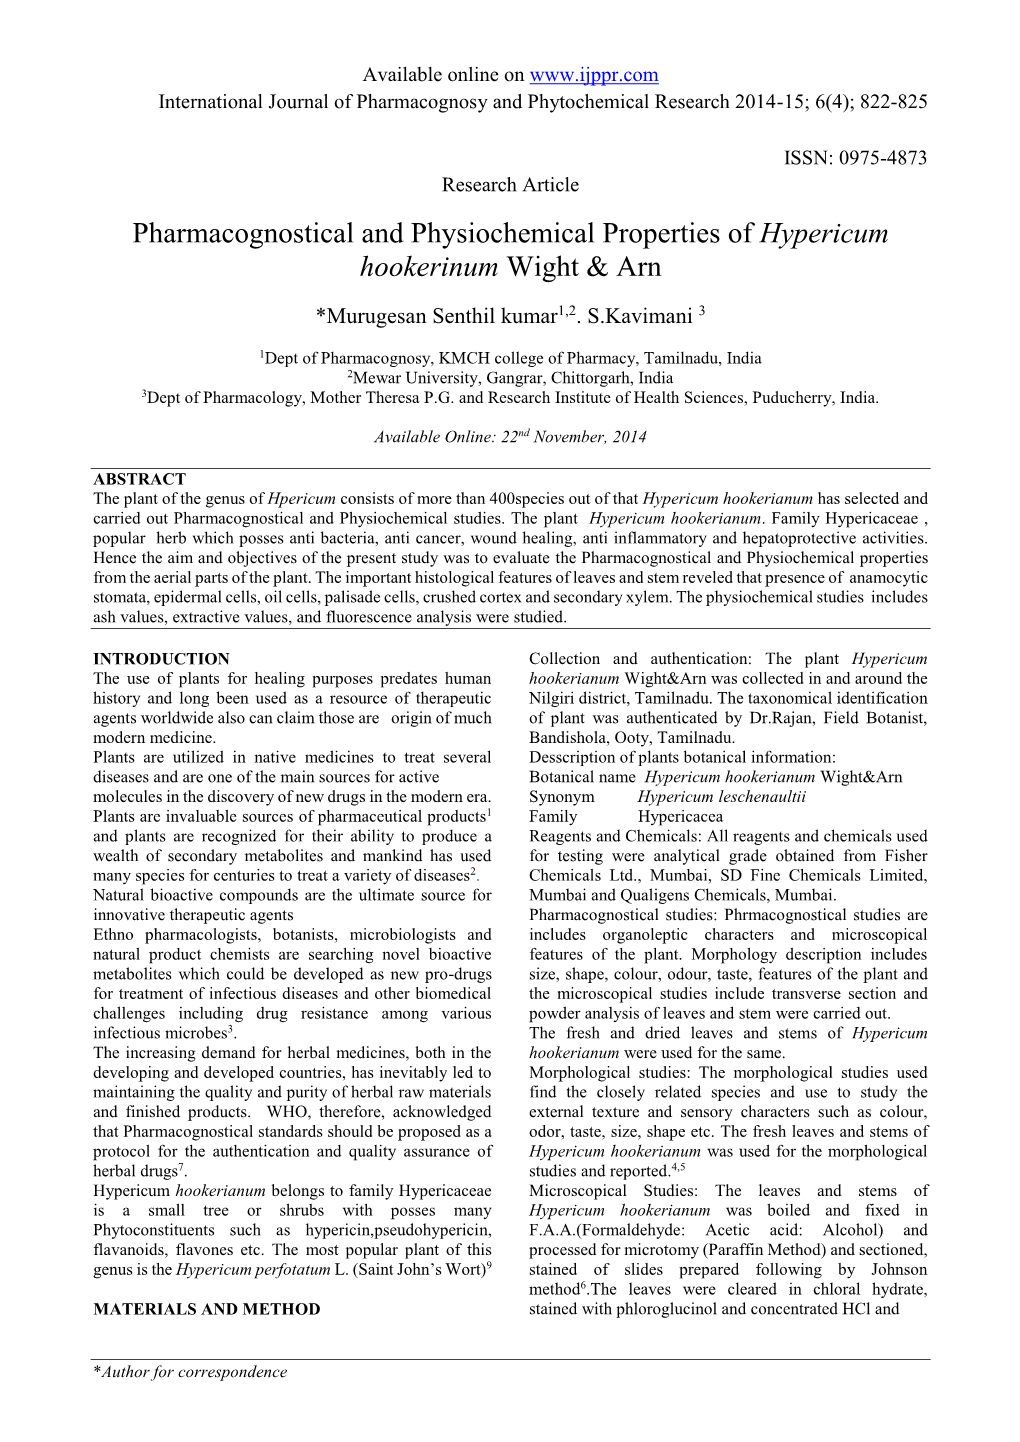 Pharmacognostical and Physiochemical Properties of Hypericum Hookerinum Wight & Arn